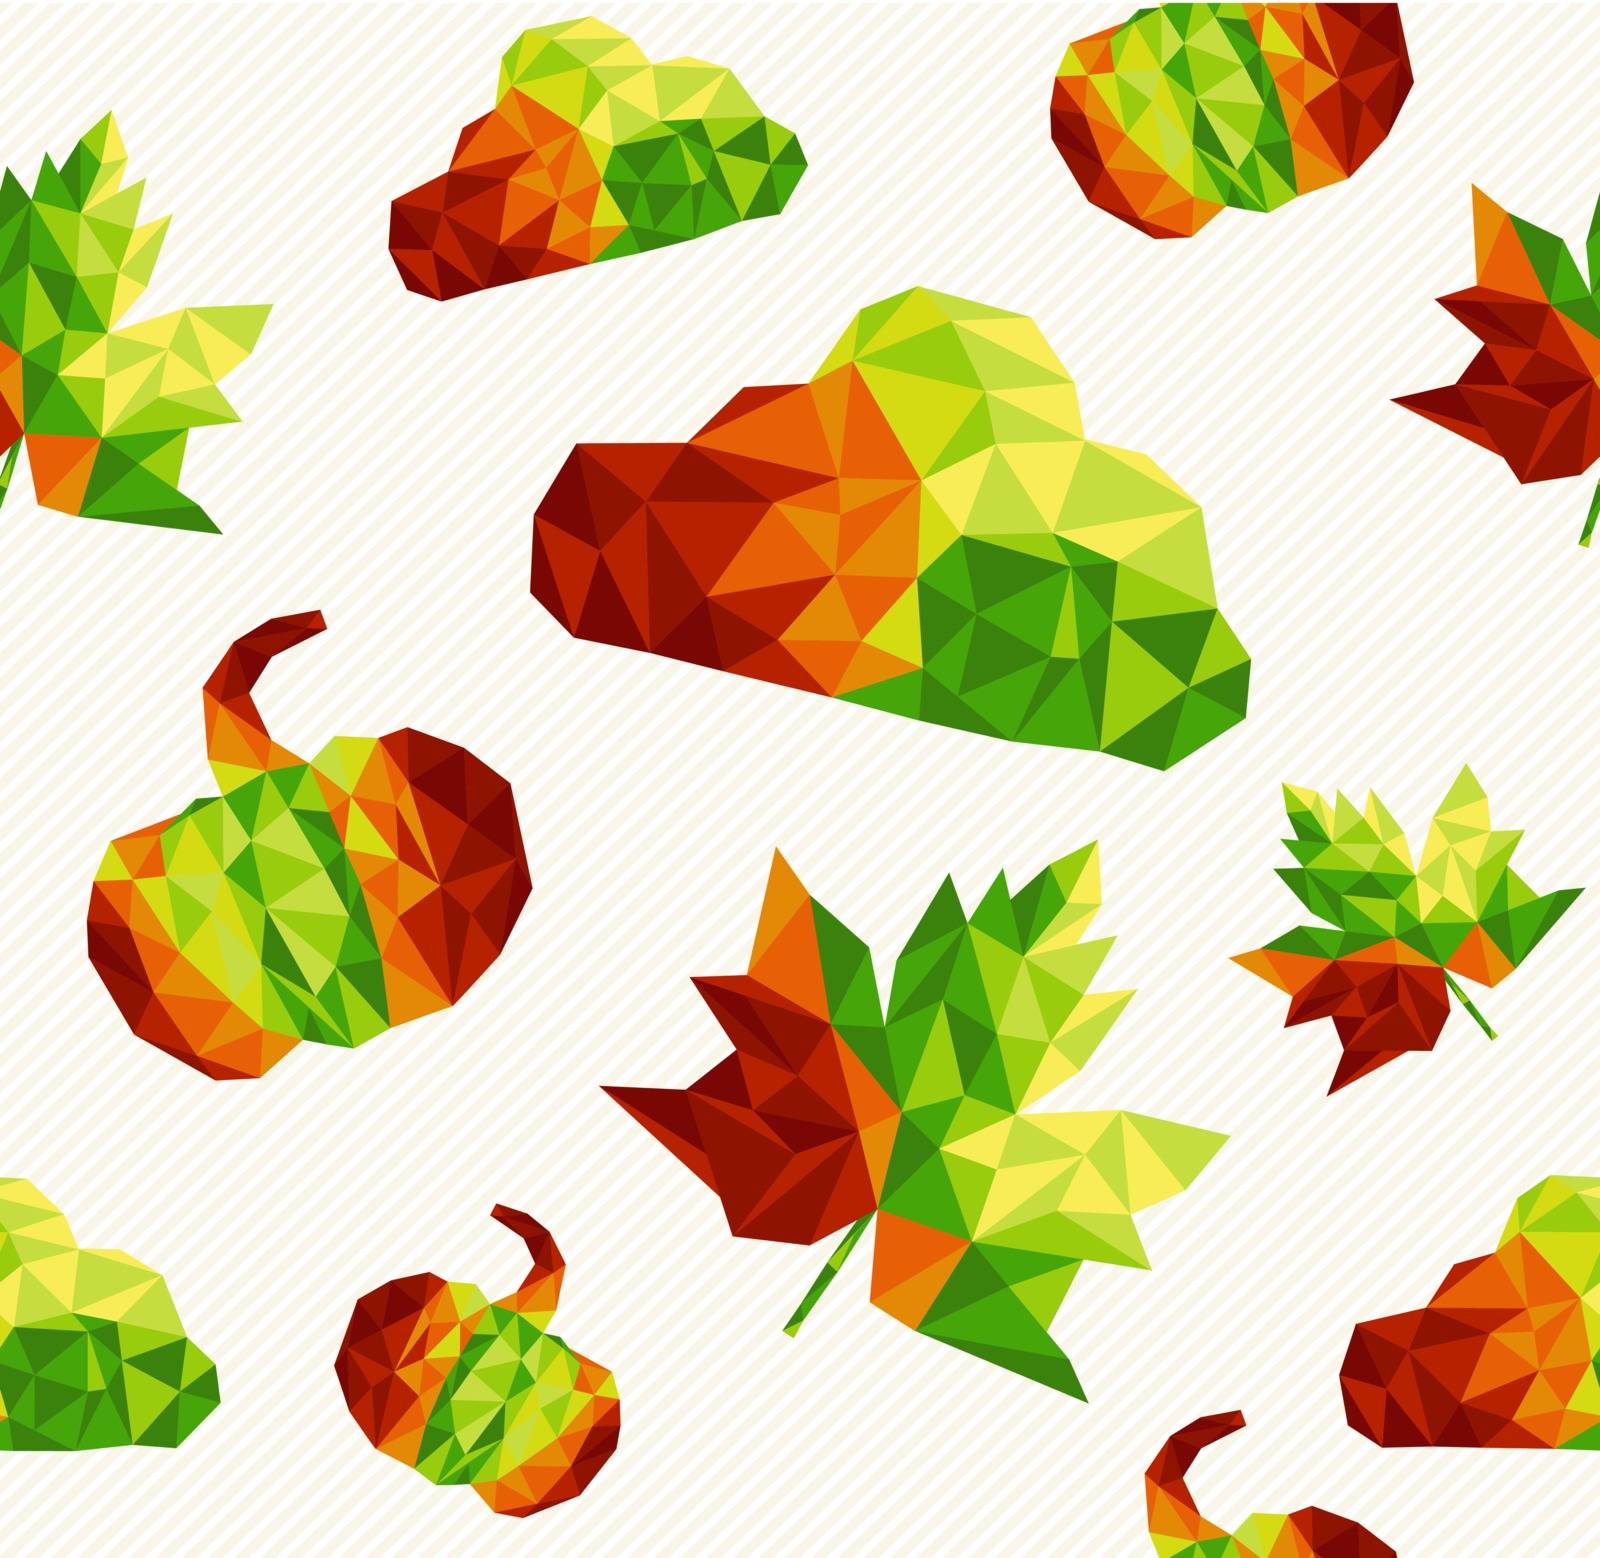 Abstract geometric autumn elements shapes seamless pattern background. EPS10 vector file organized in layers for easy editing.